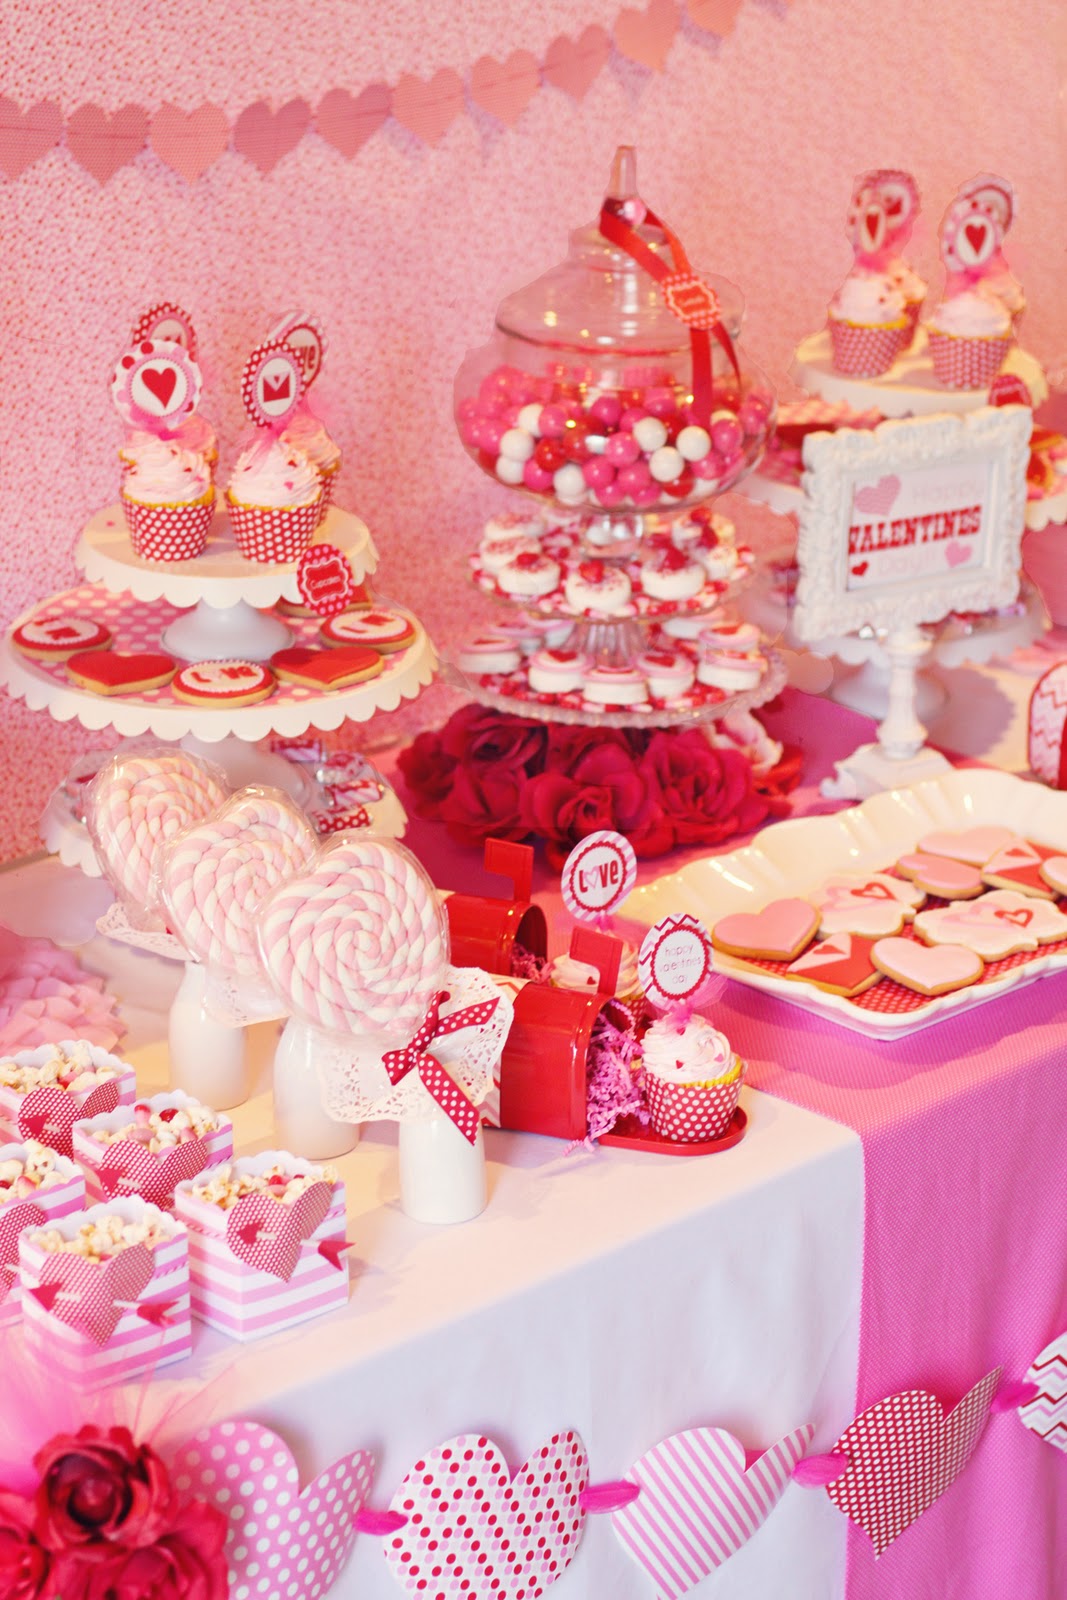 Amanda's Parties To Go: Valentines Party Table Ideas